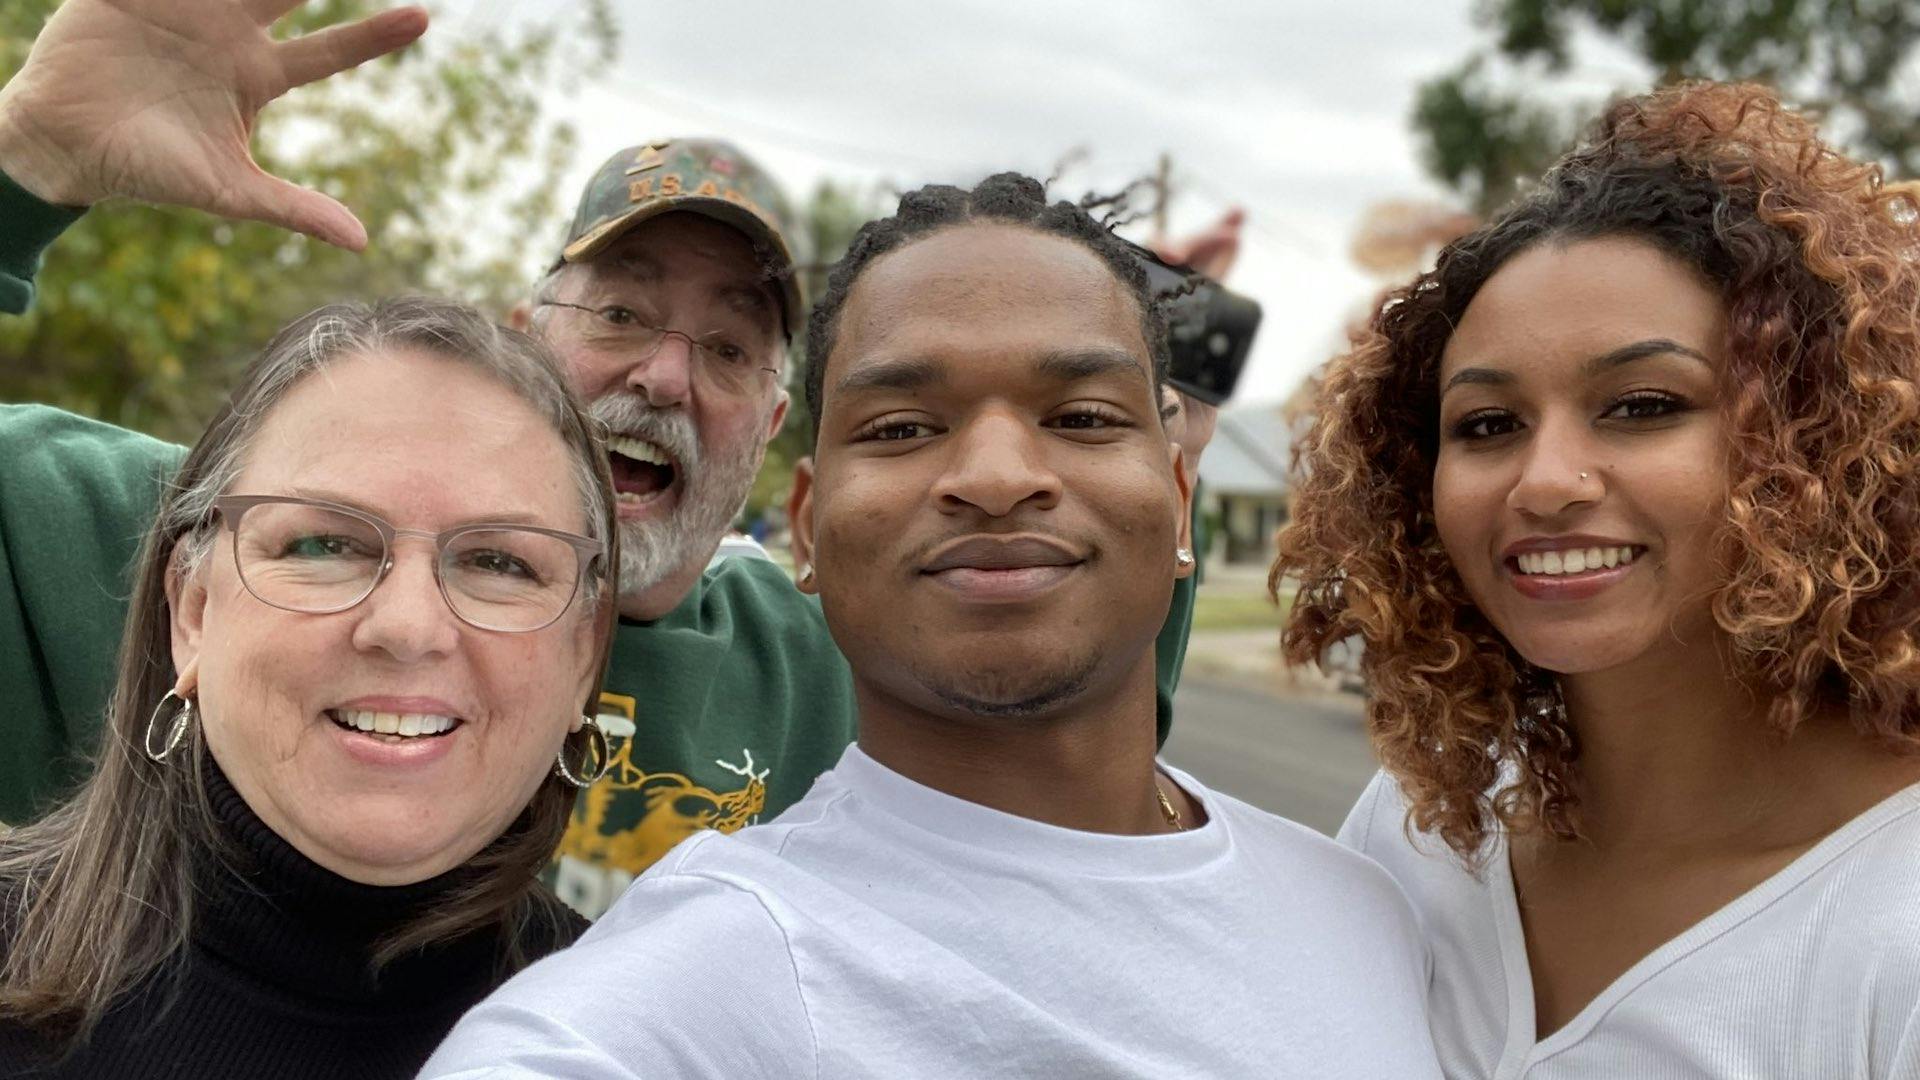 Jamal Hinton celebrating Thanksgiving in 2021 with his girlfriend, Wanda Dench, and Dench’s husband.